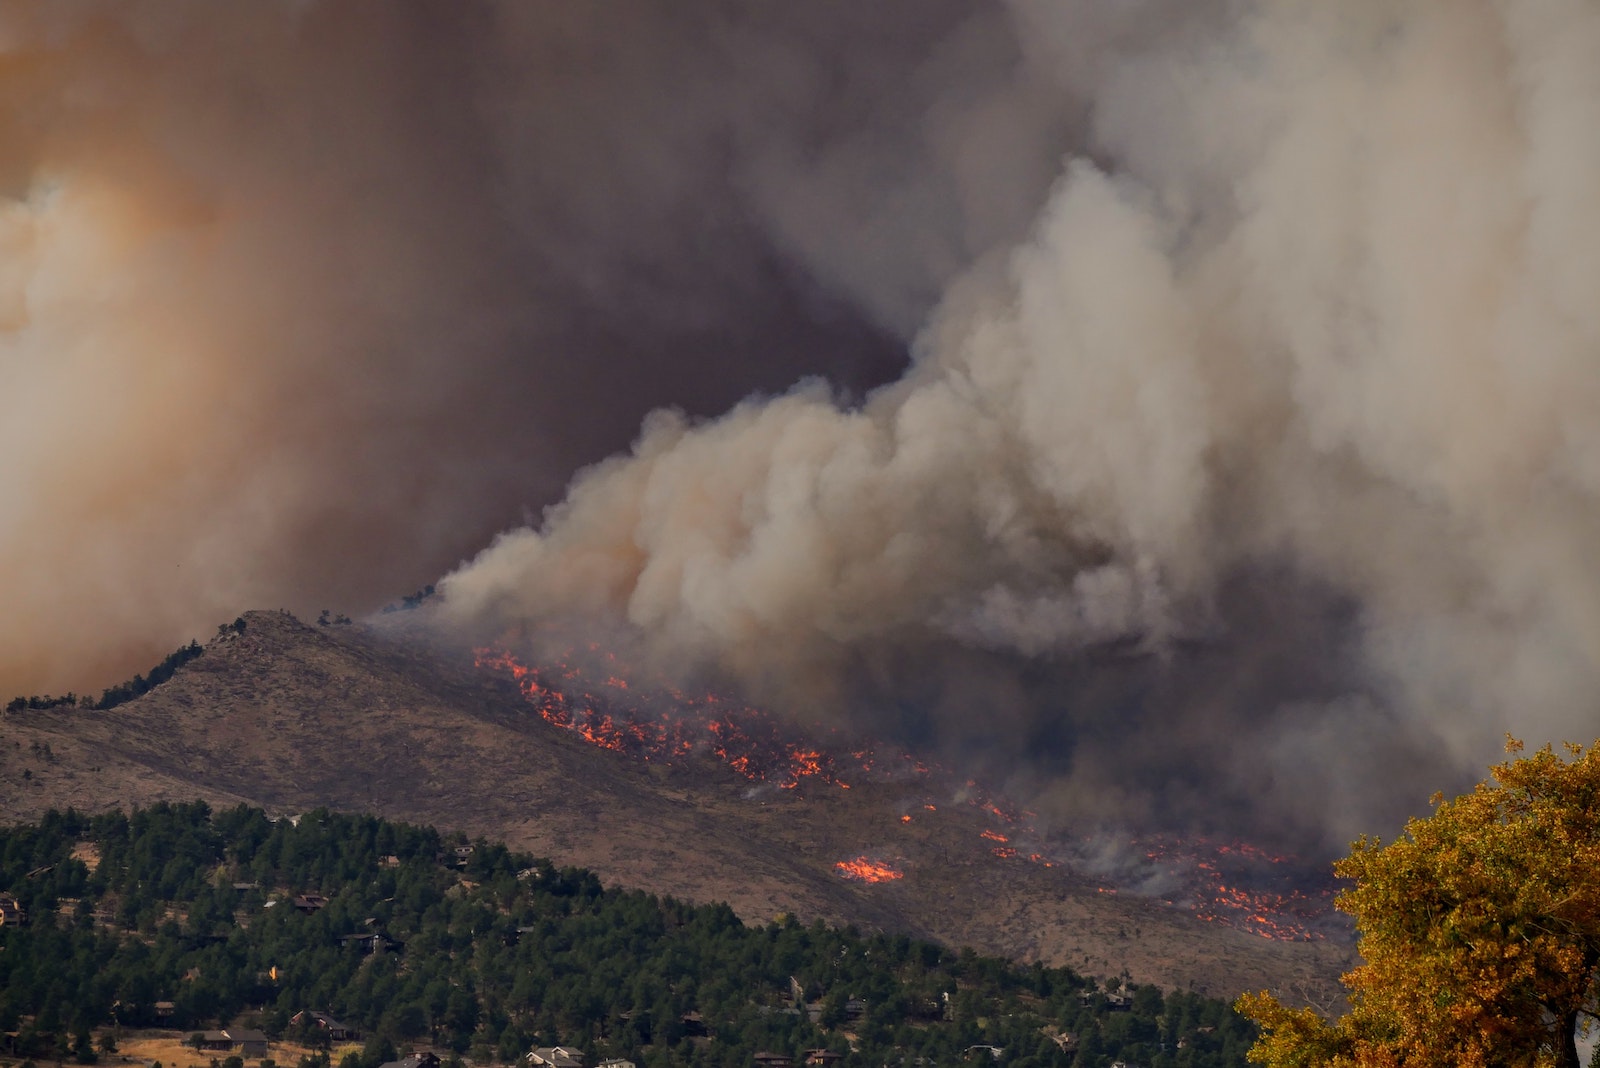 wildfire in the mountains with large smoke cloud billowing from it